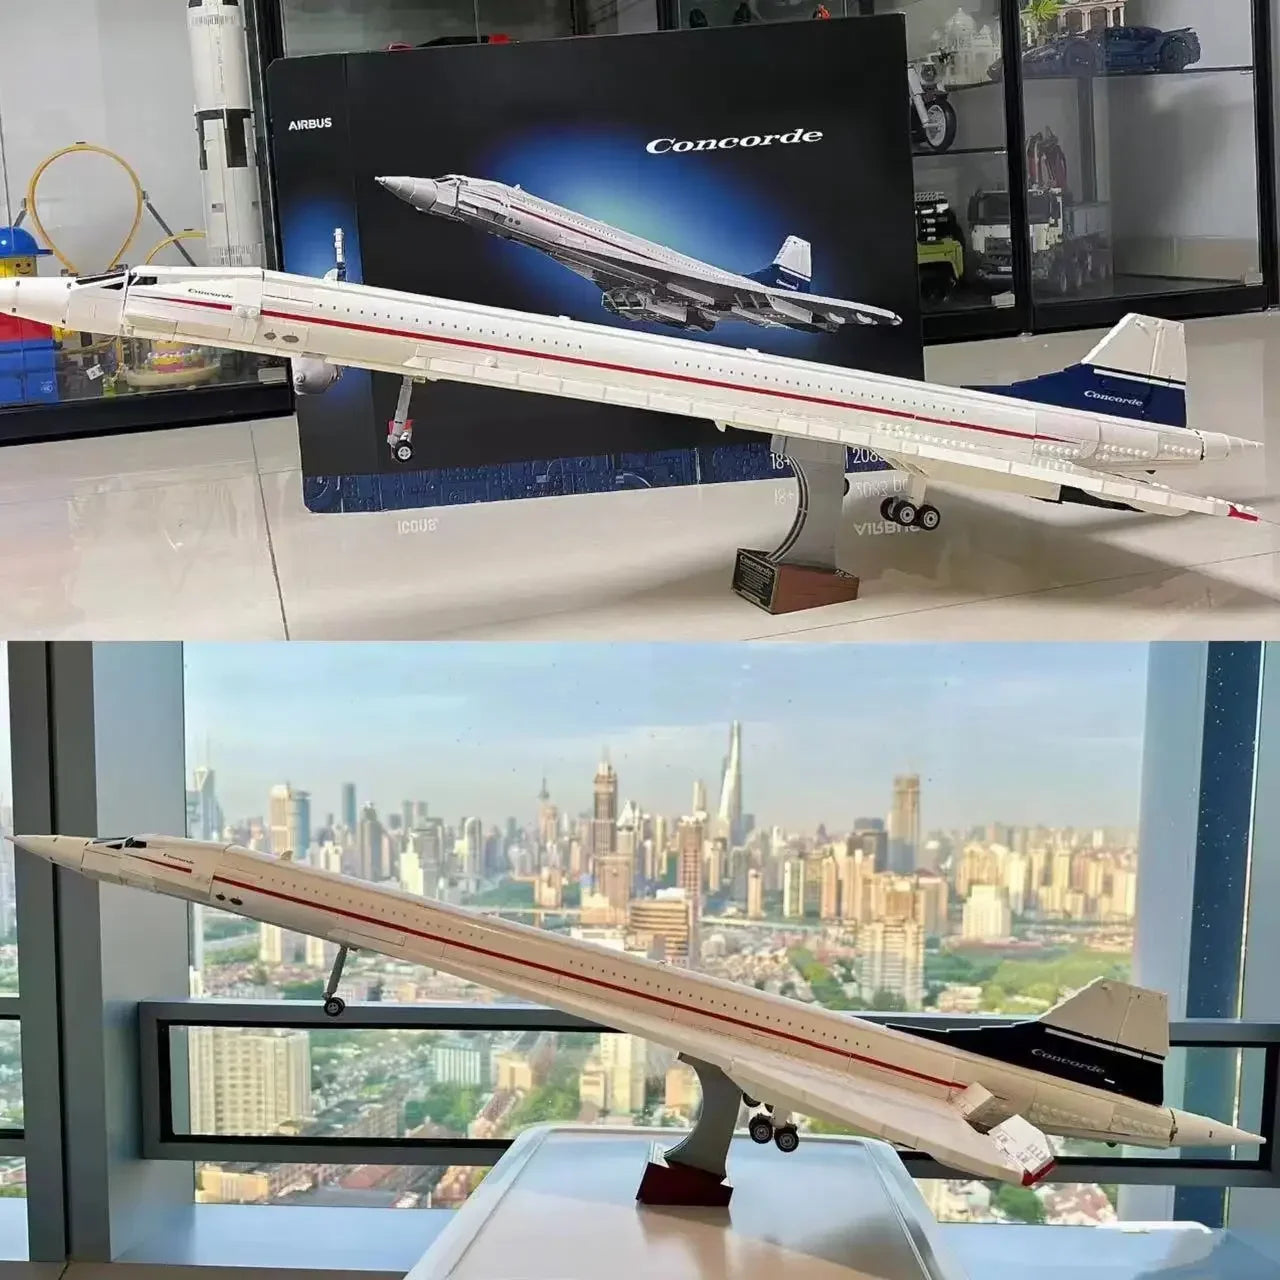 Aviation Brick Model Icons: Concord Supersonic Commercial Passenger Airplane Brick Model Set - Reach for the Skies